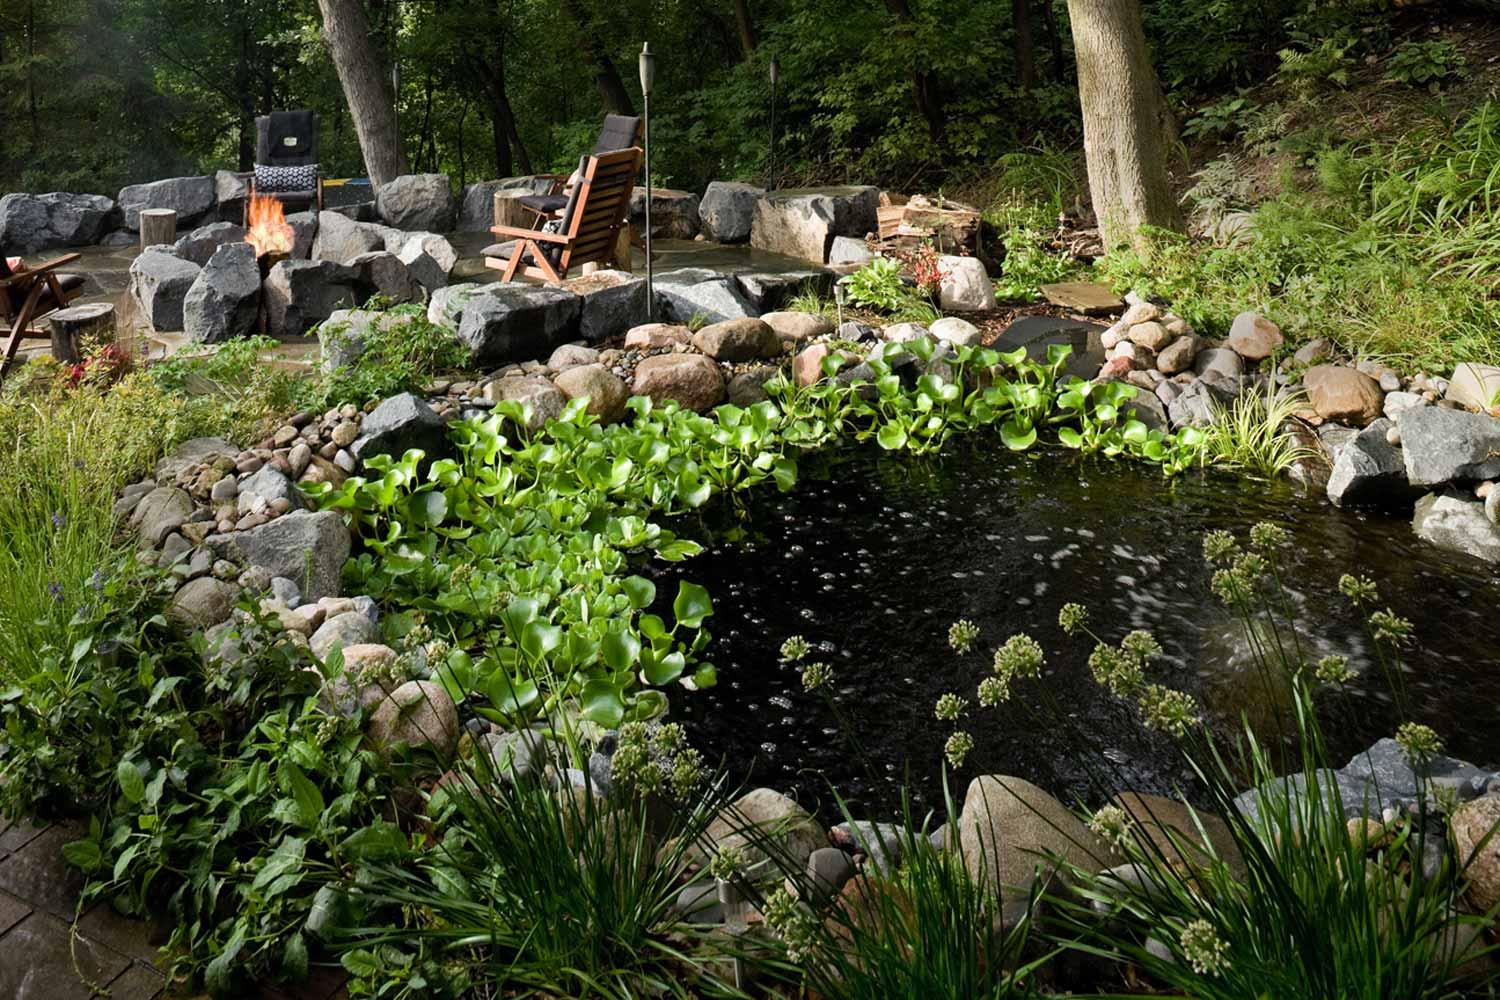 Backyard fish pond with and aquatic garden.